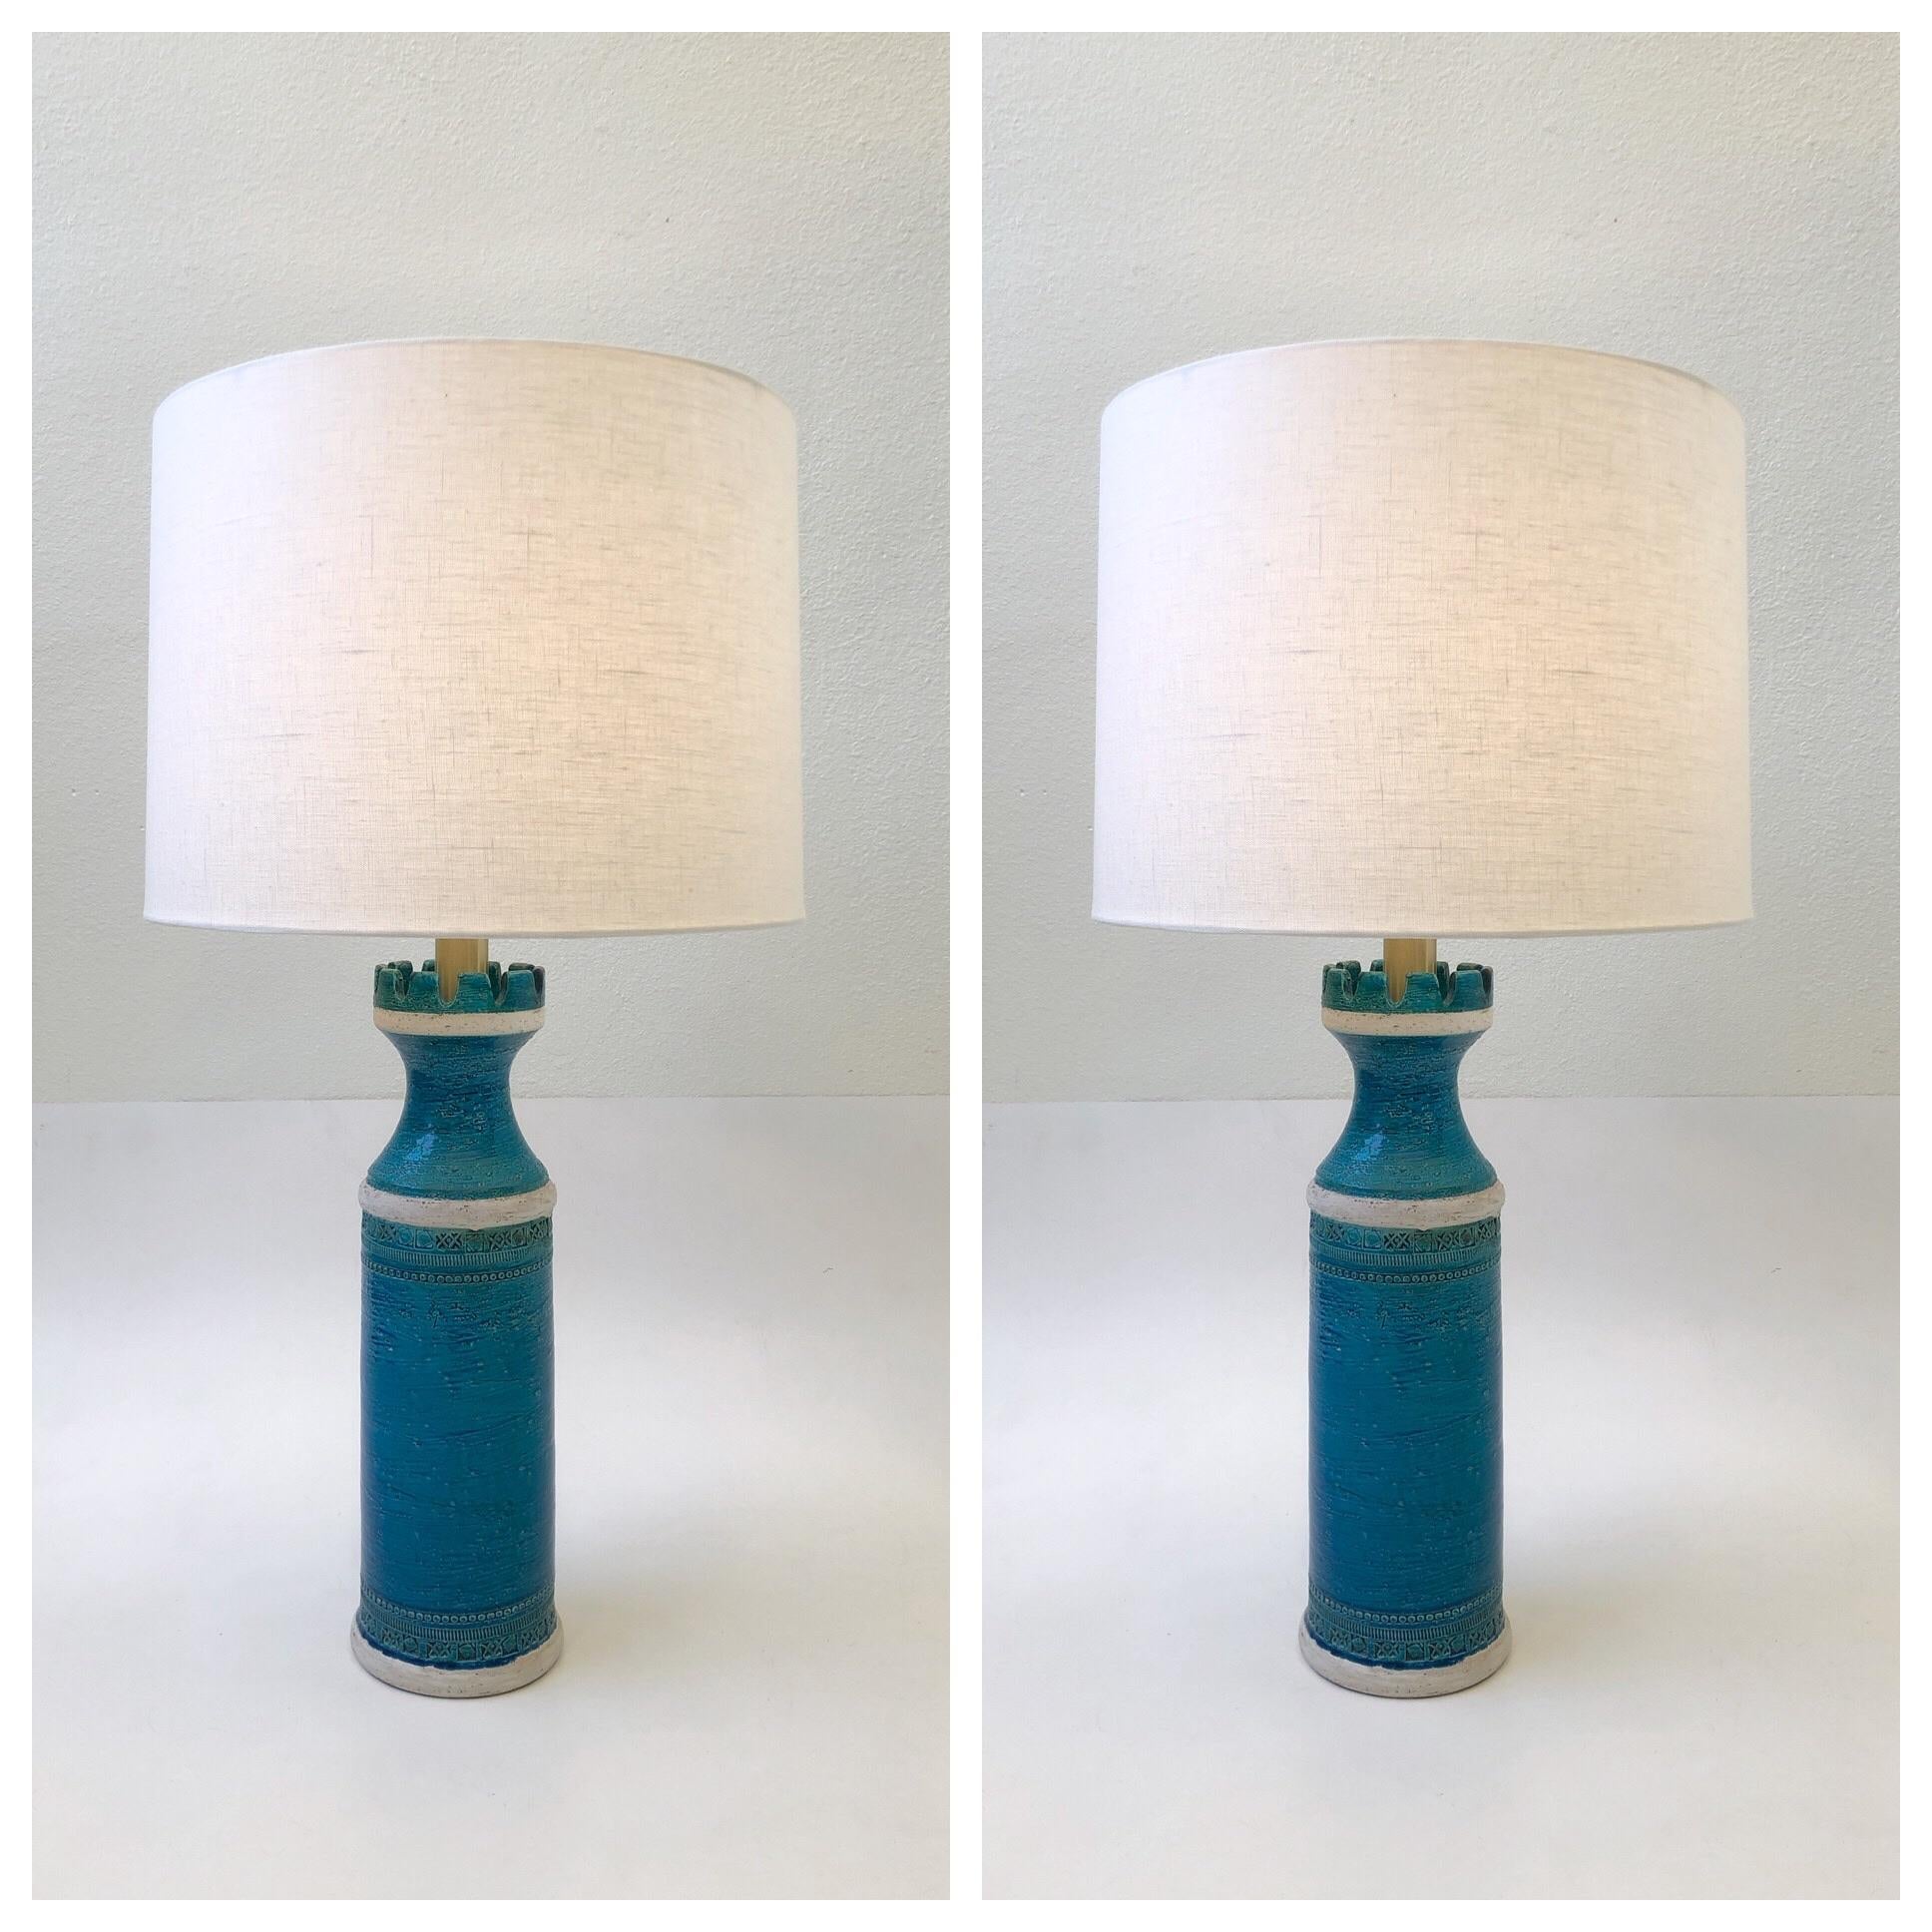 A rare pair of 1960s Italian ceramic table lamps designed by Aldo Londi for Bitossi. The lamps have been newly rewired new polished brass hardware and new vanilla linen shades. We can change the hardware finish to polish nickel if preferred. The